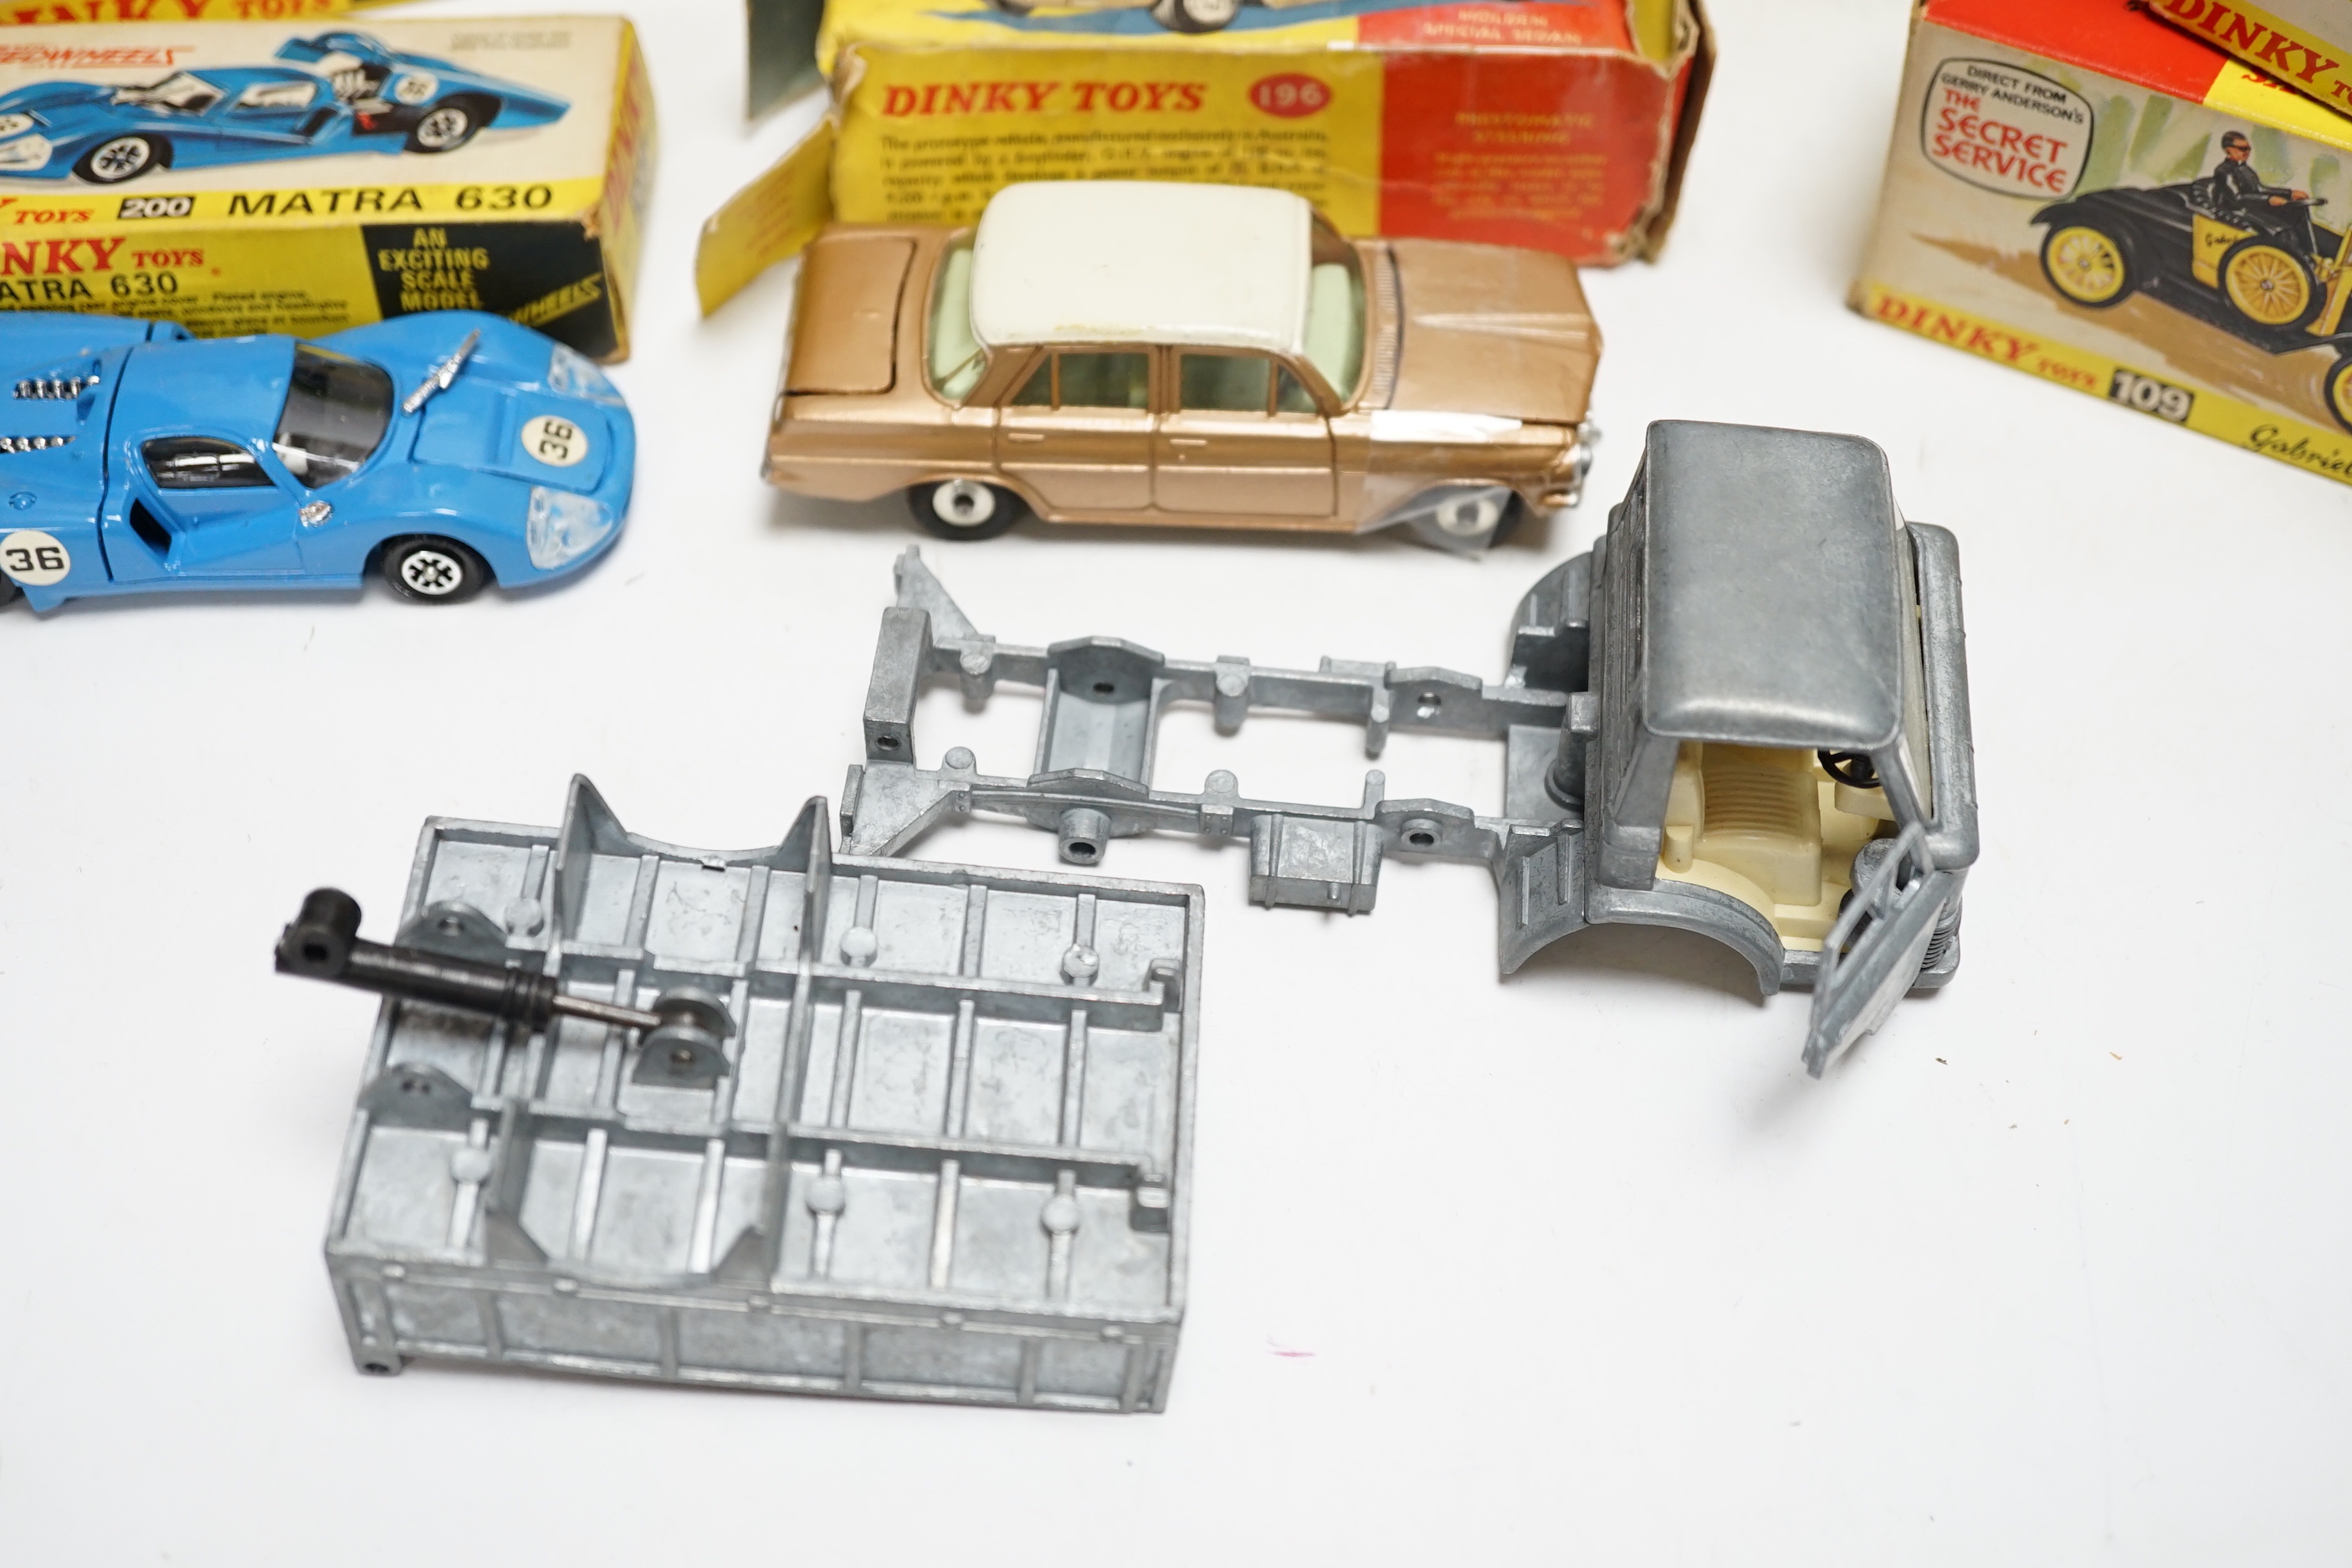 Eight boxed Dinky Toys including two (109) Gabriel Model T Fords, (987) ABC TV Mobile Control Room, (200) Matra 630, (116) Volvo 1800S, (216) Ferrari Dino, (196) Holden Special Sedan, (451) Johnston Road Sweeper, plus an